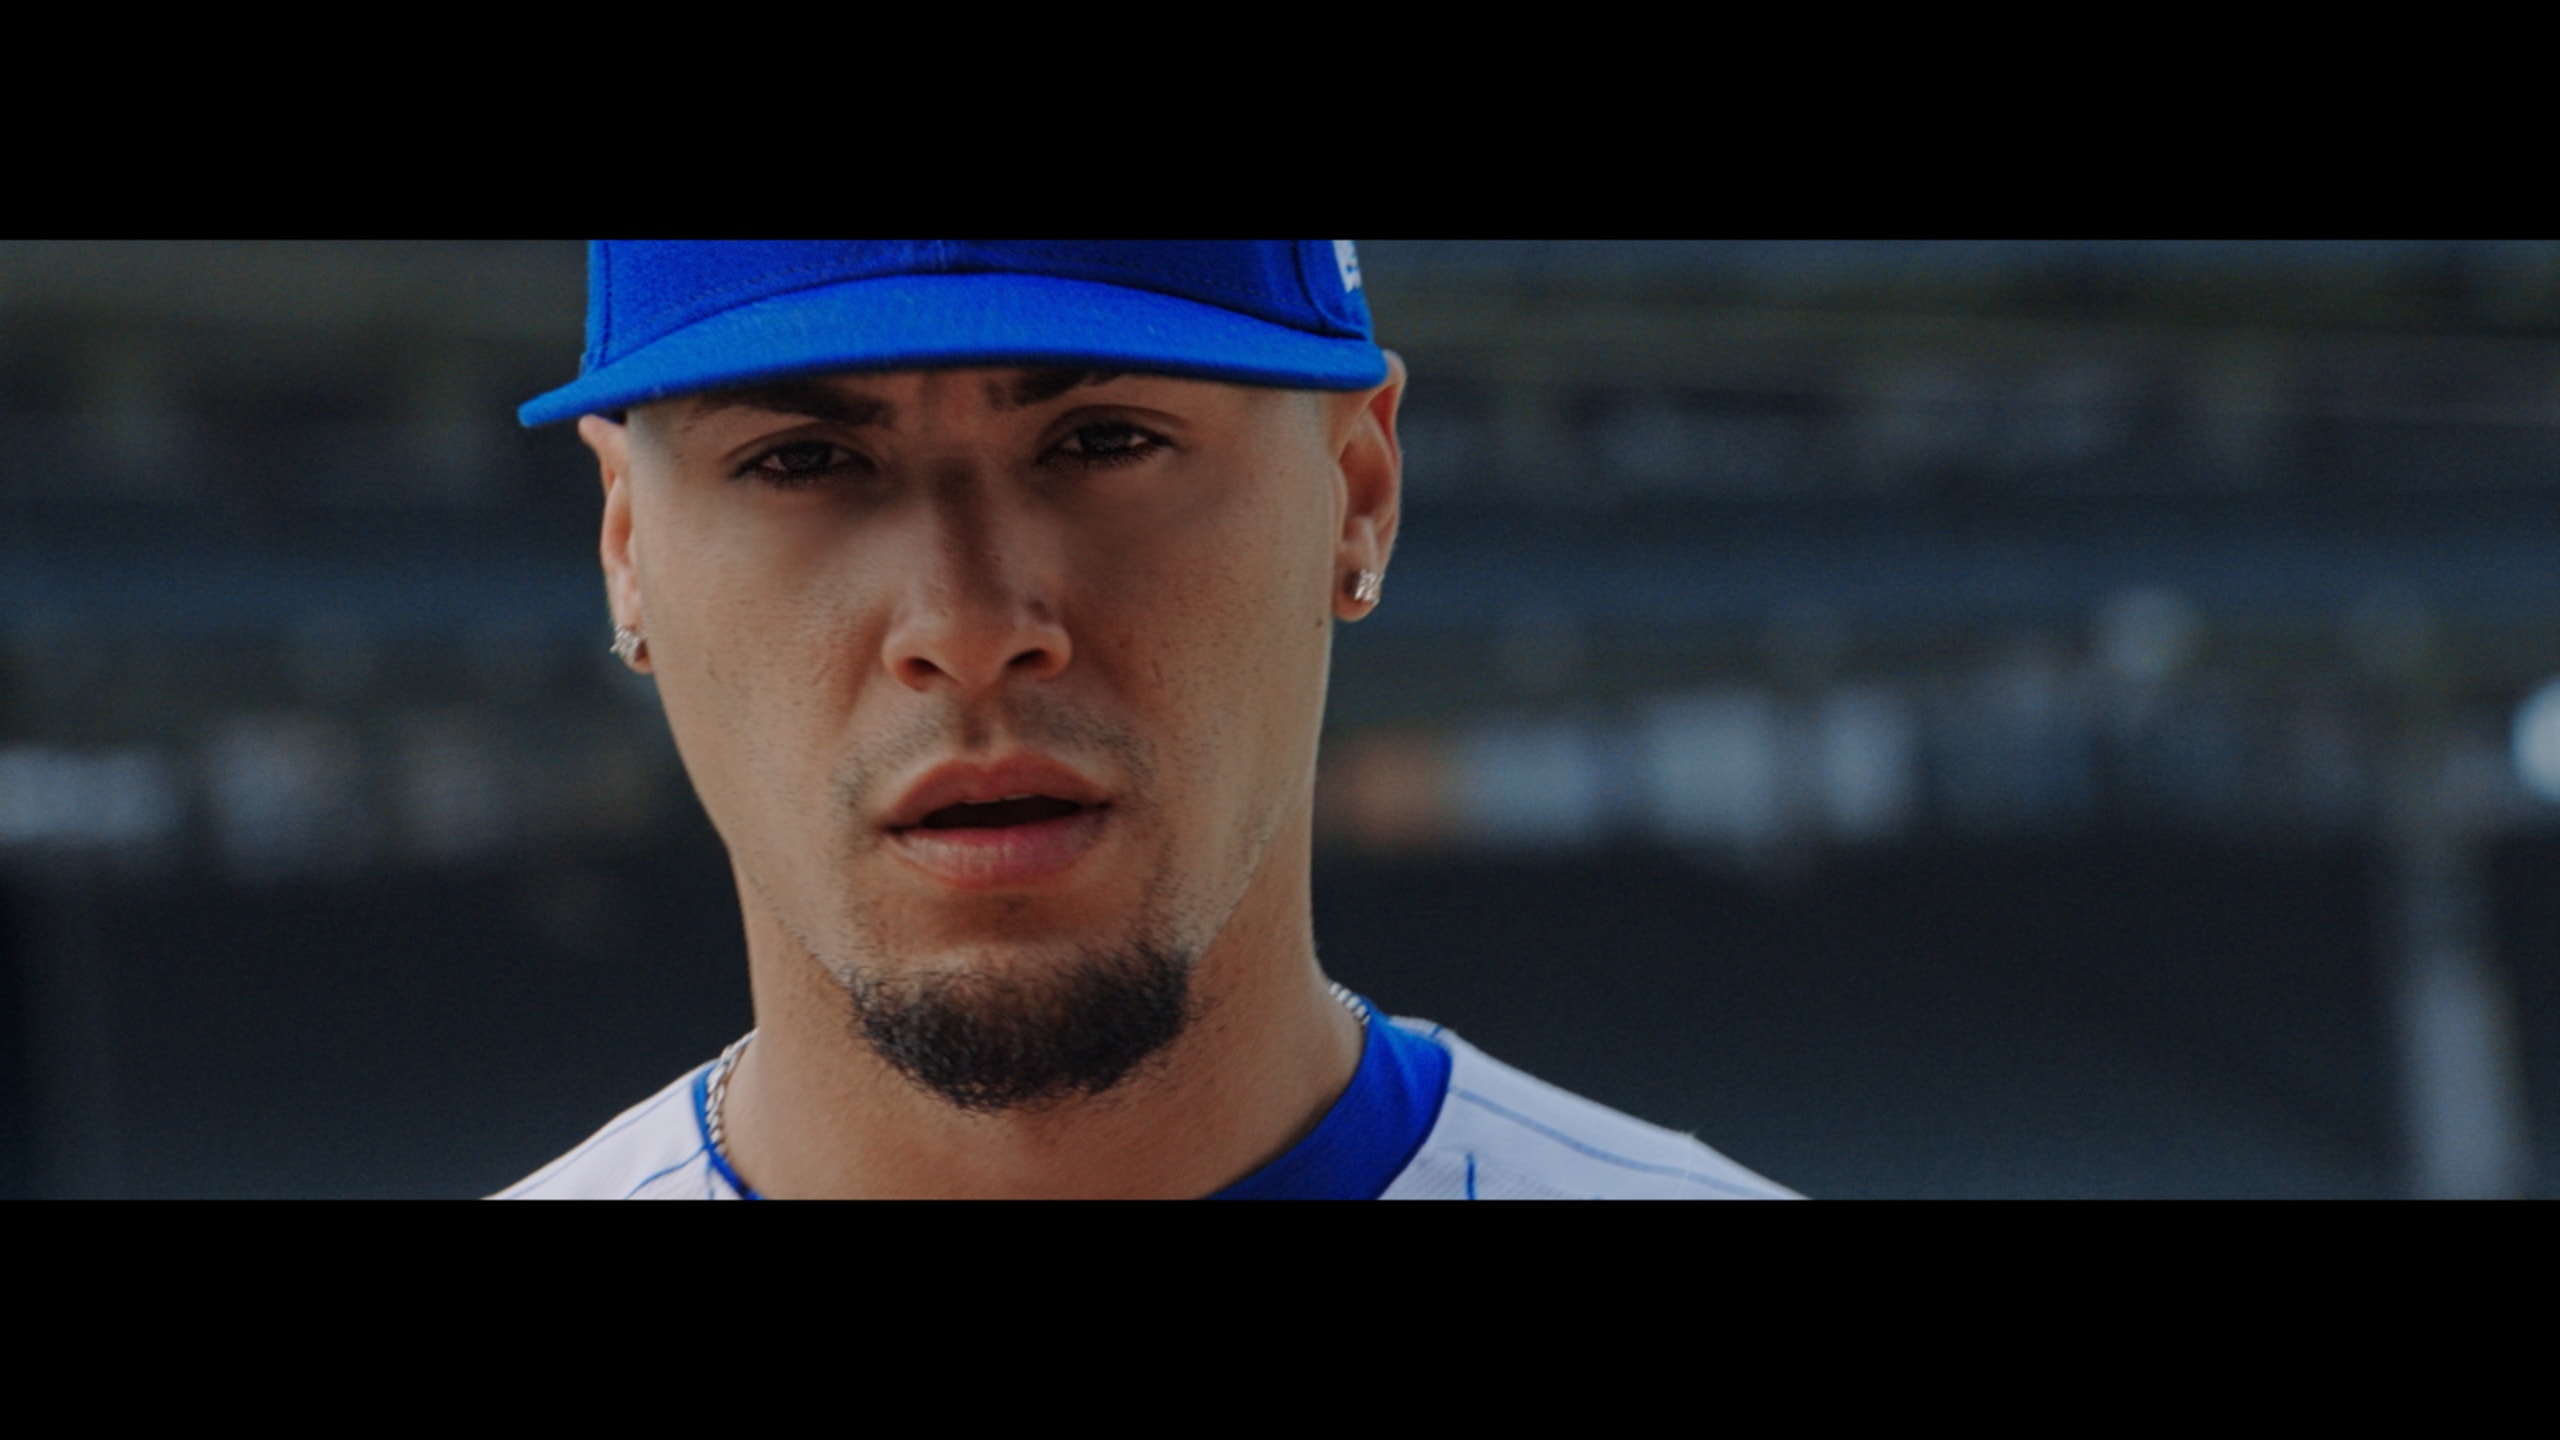 Watch Javier Baez's new MLB ad: 'Call me what you want. I just